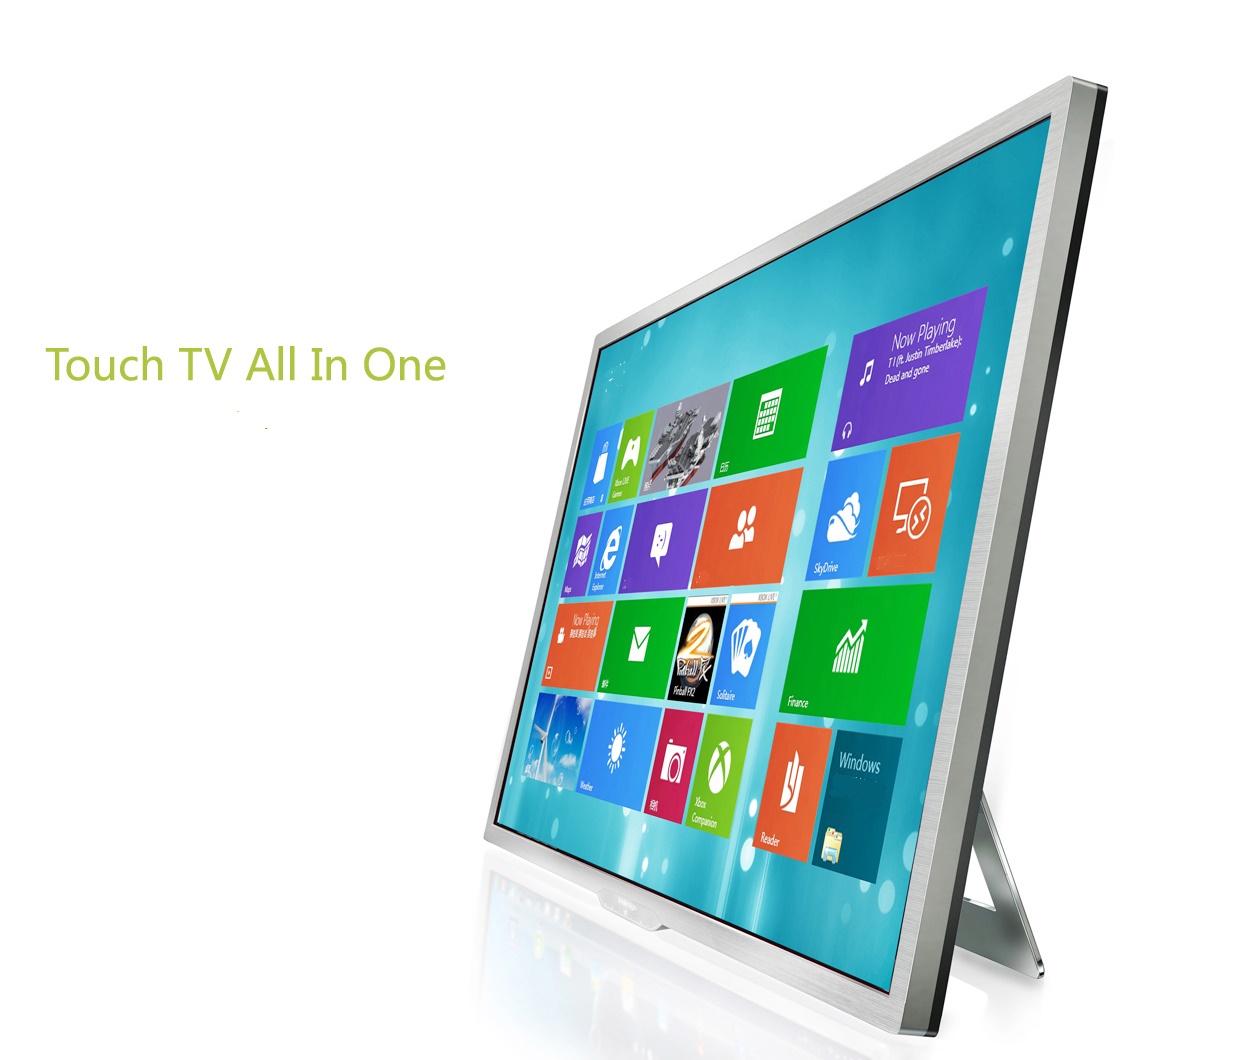 55” Touch Screen,10 touch